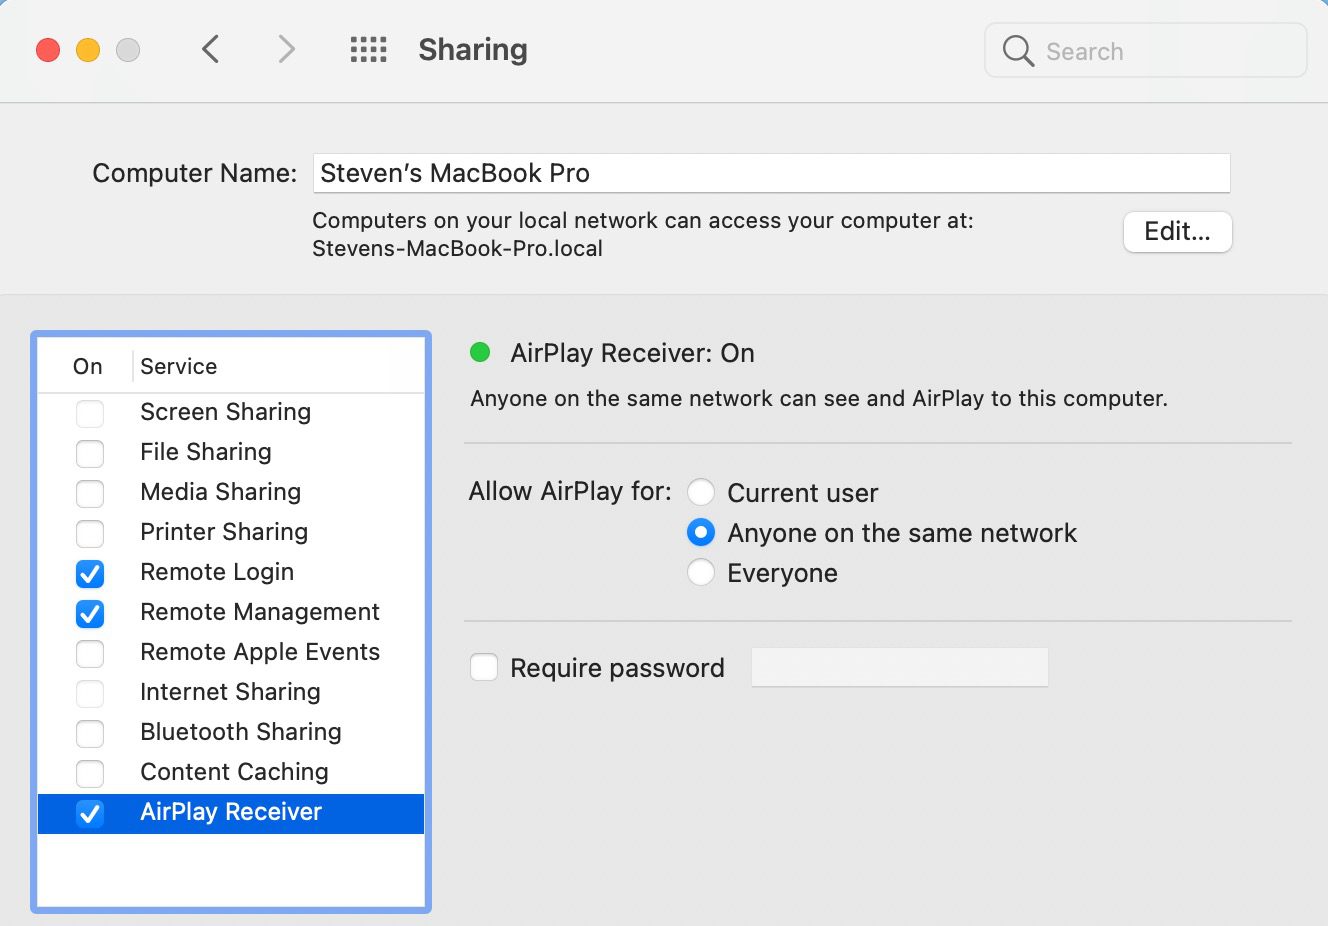 Enabling "AirPlay Receiver" (AKA AirPlay to Mac) in System Preferences > Sharing